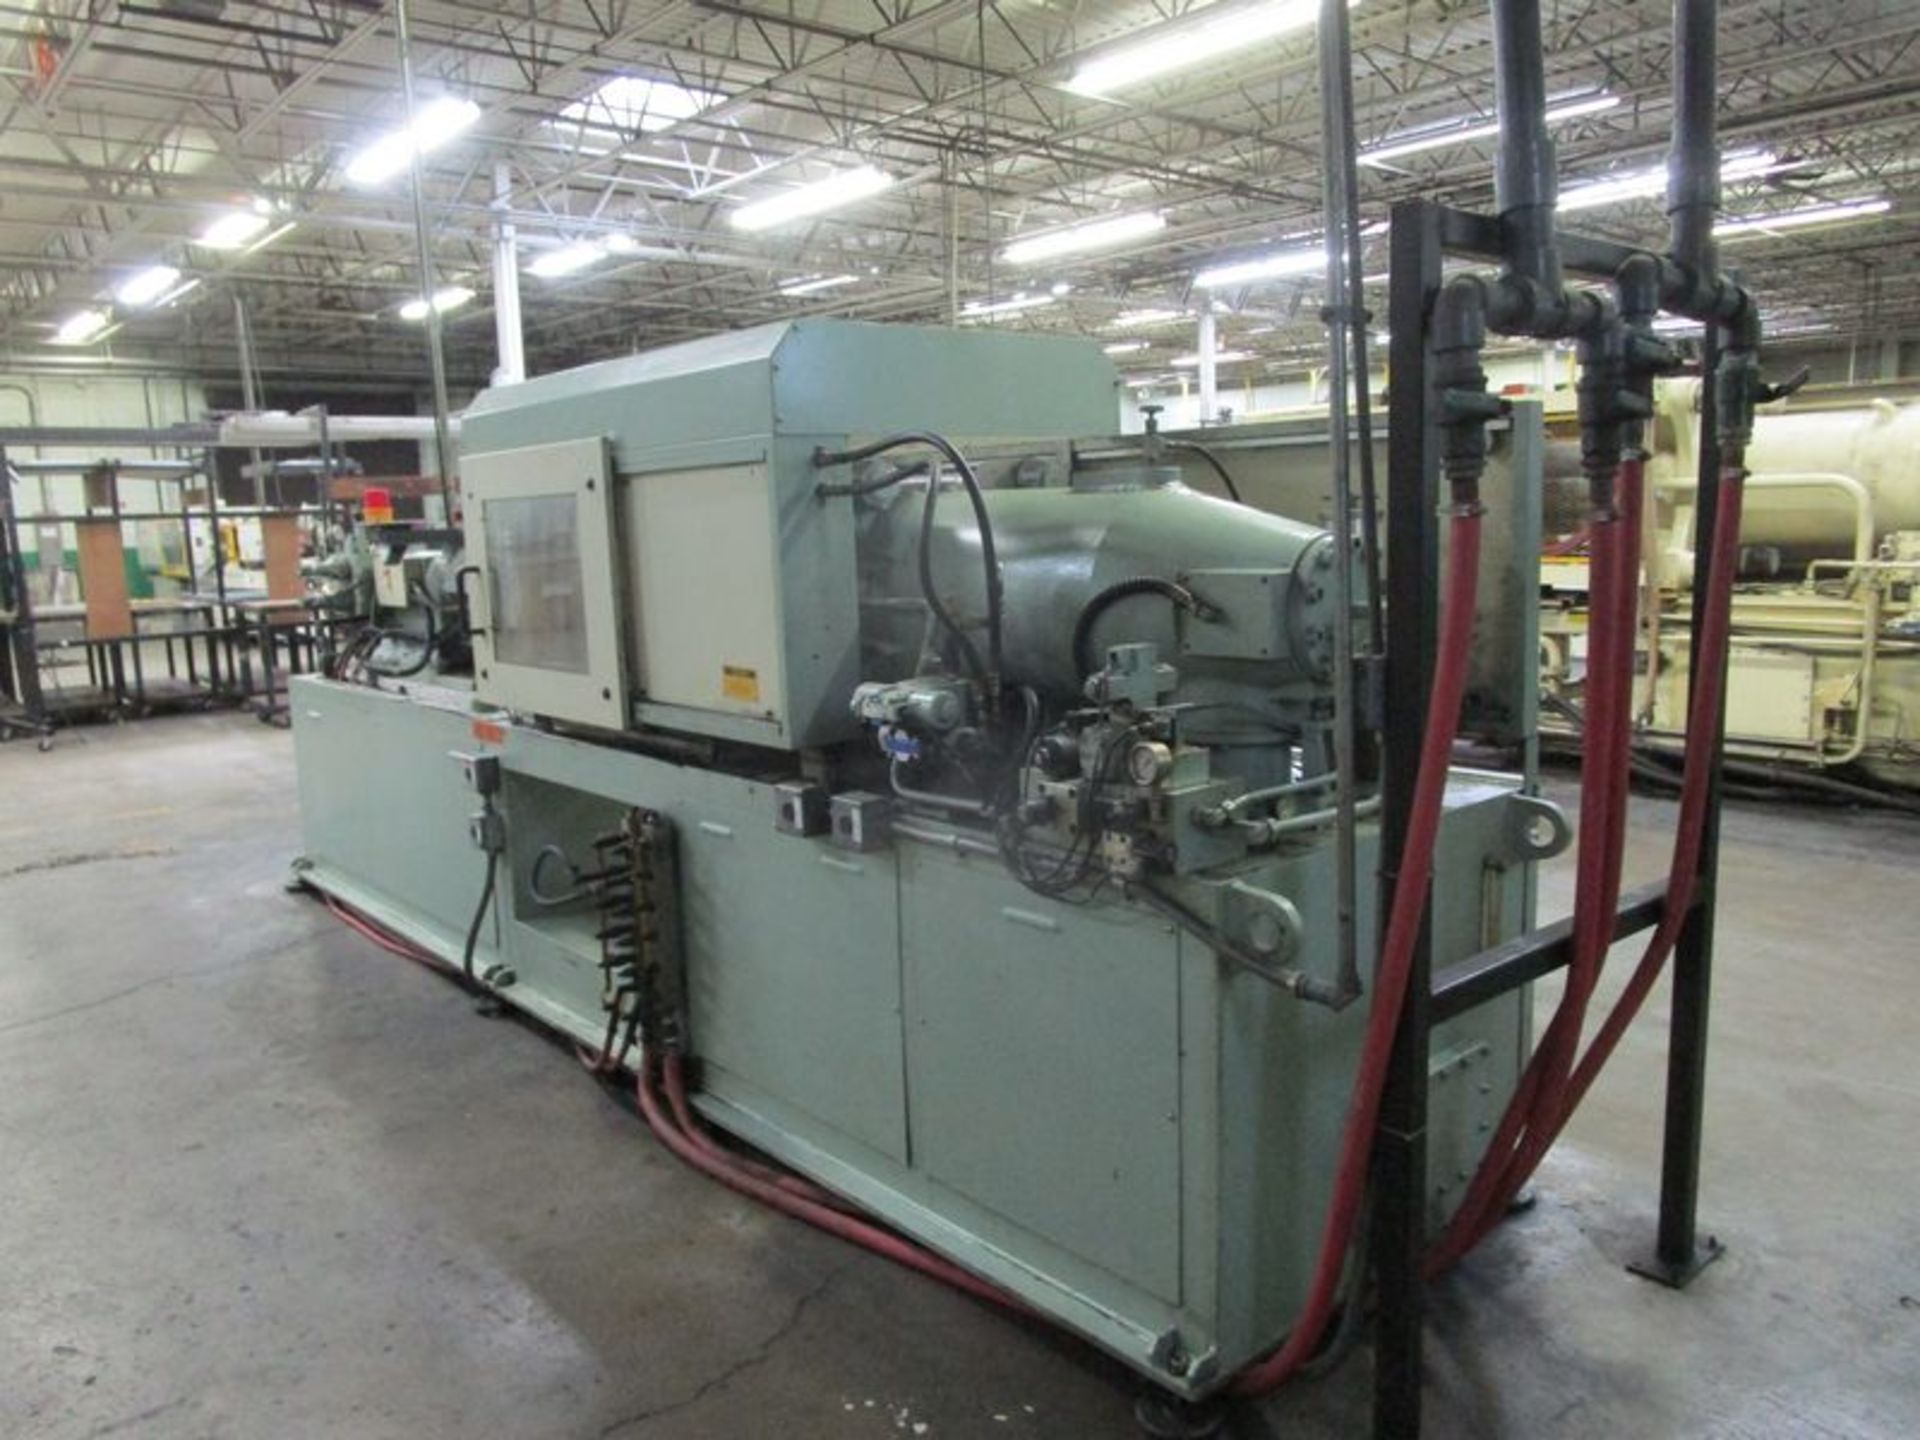 Nissin NC-145-FX2C 145-Ton Plastic Injection Molding Machine, S/N 95-145-13, 1995 - Image 6 of 9